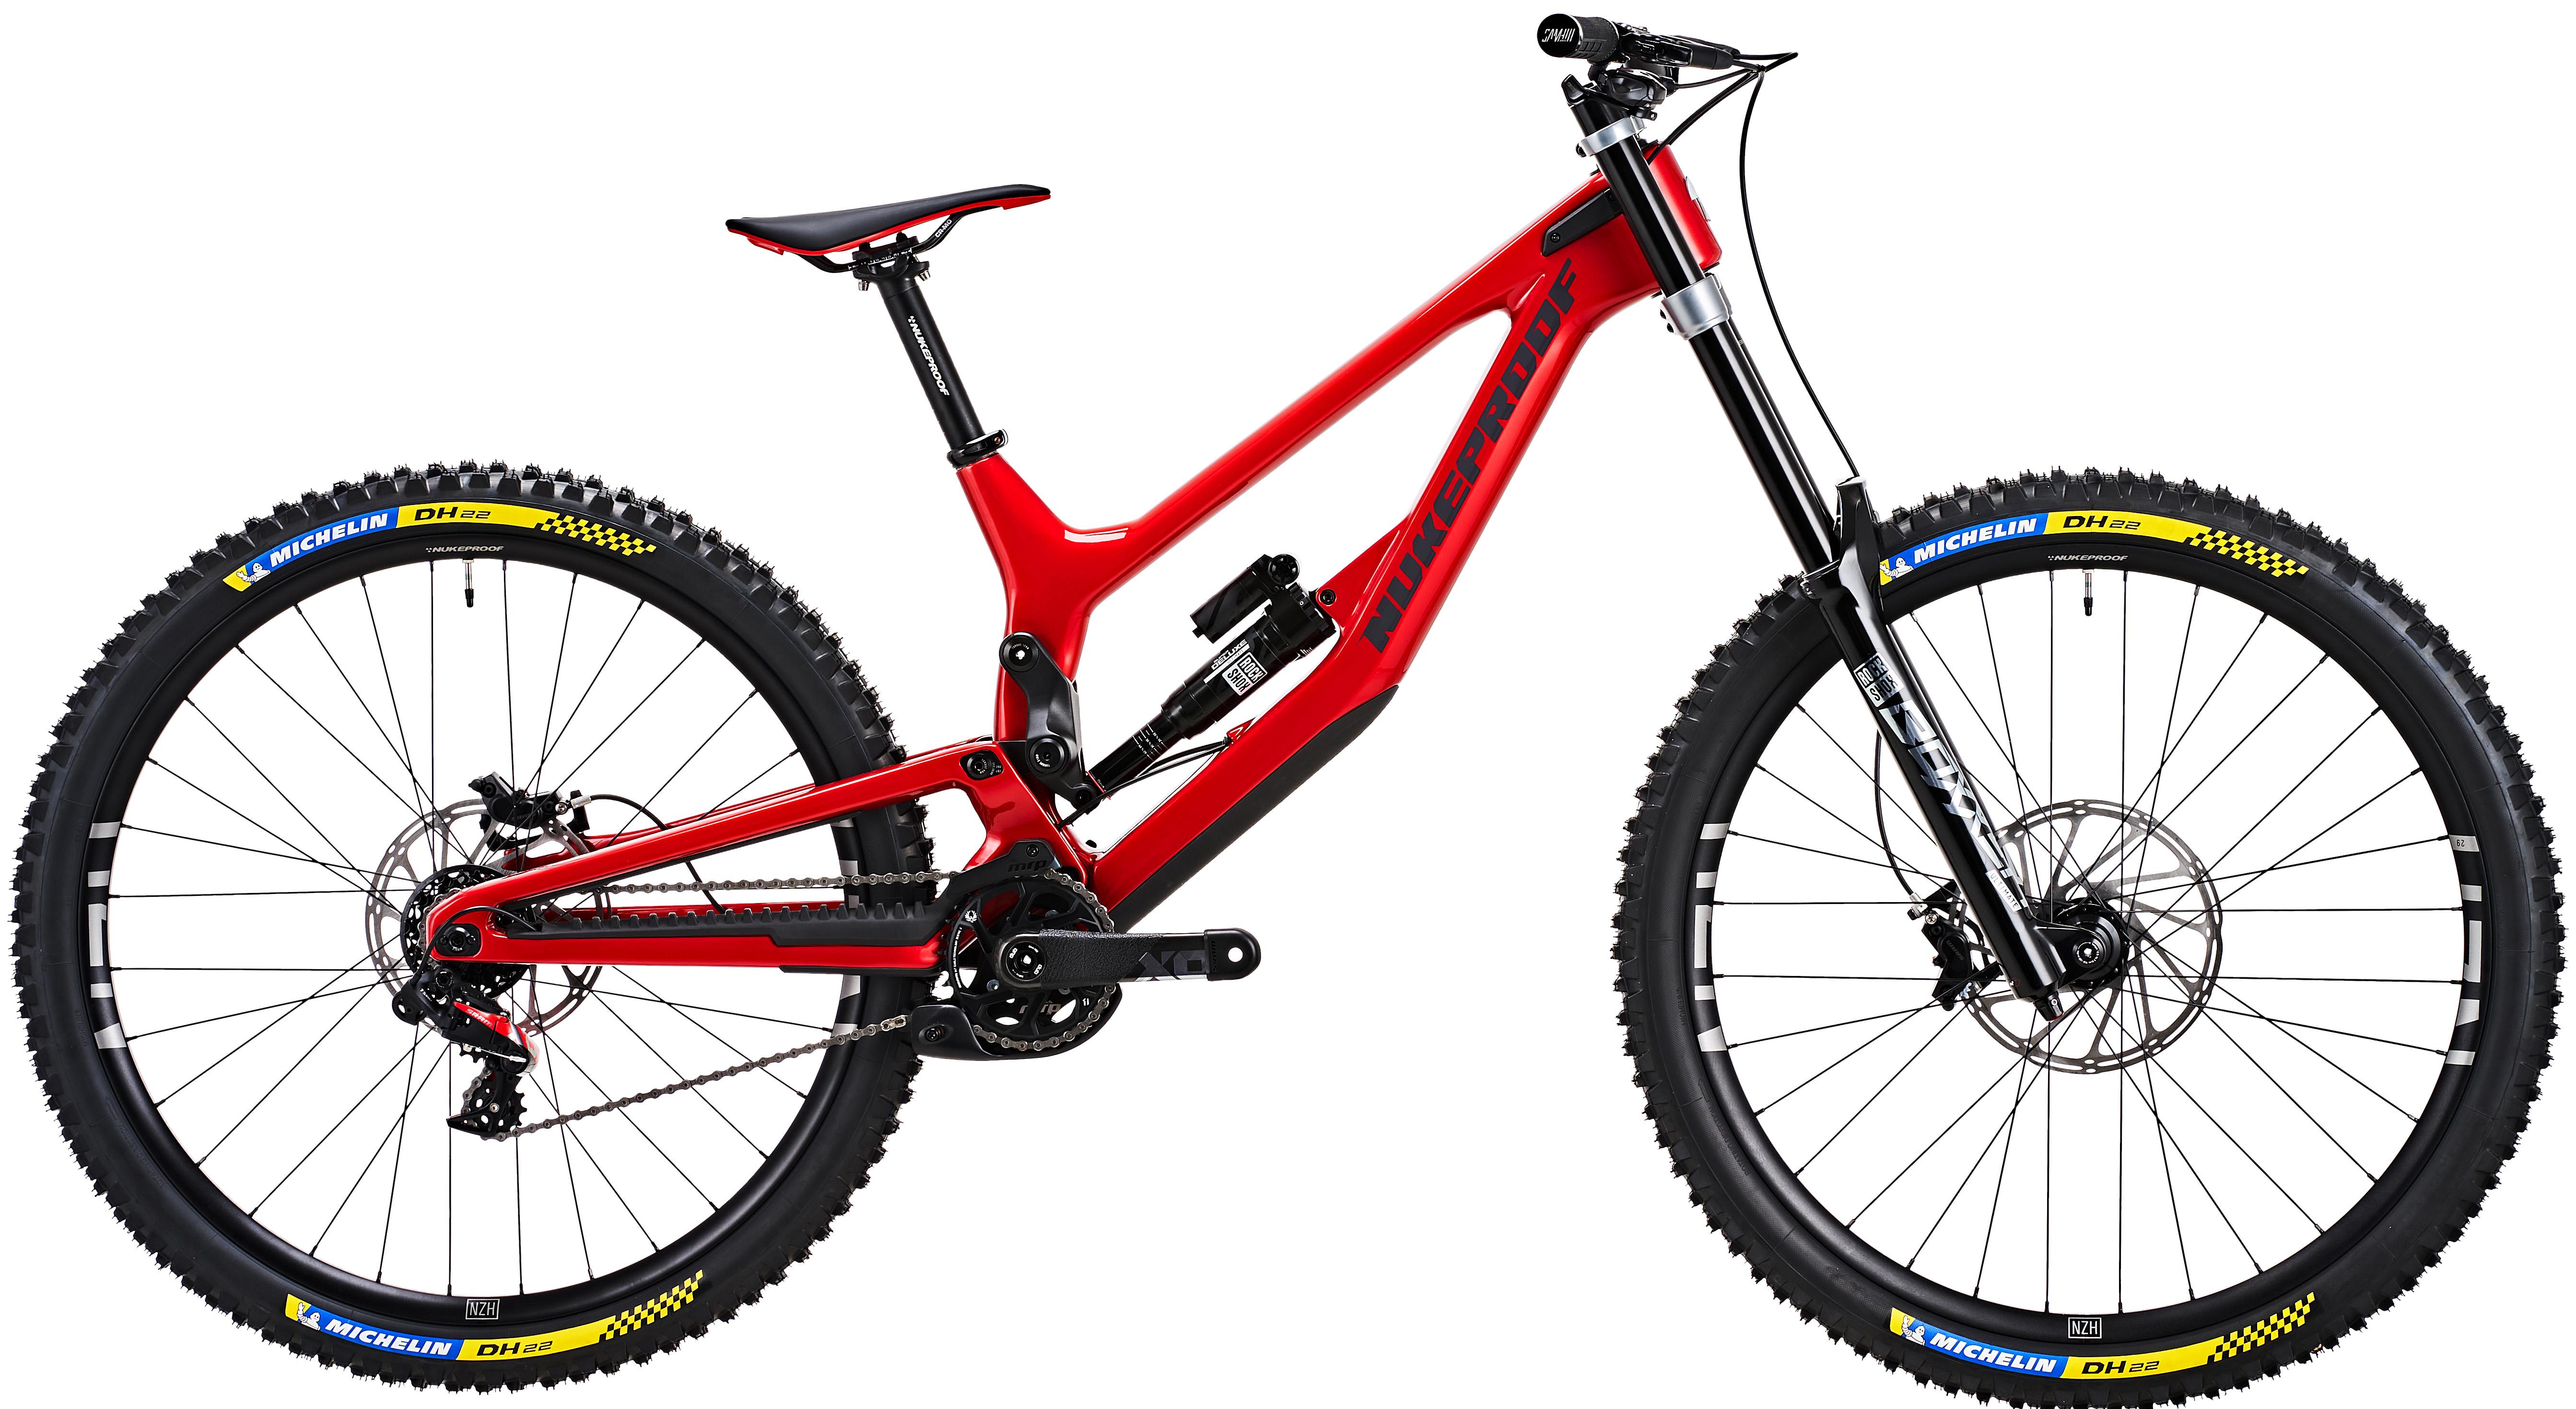 Nukeproof Dissent 290 RS Carbon Bike (XO1 DH), Racing Red